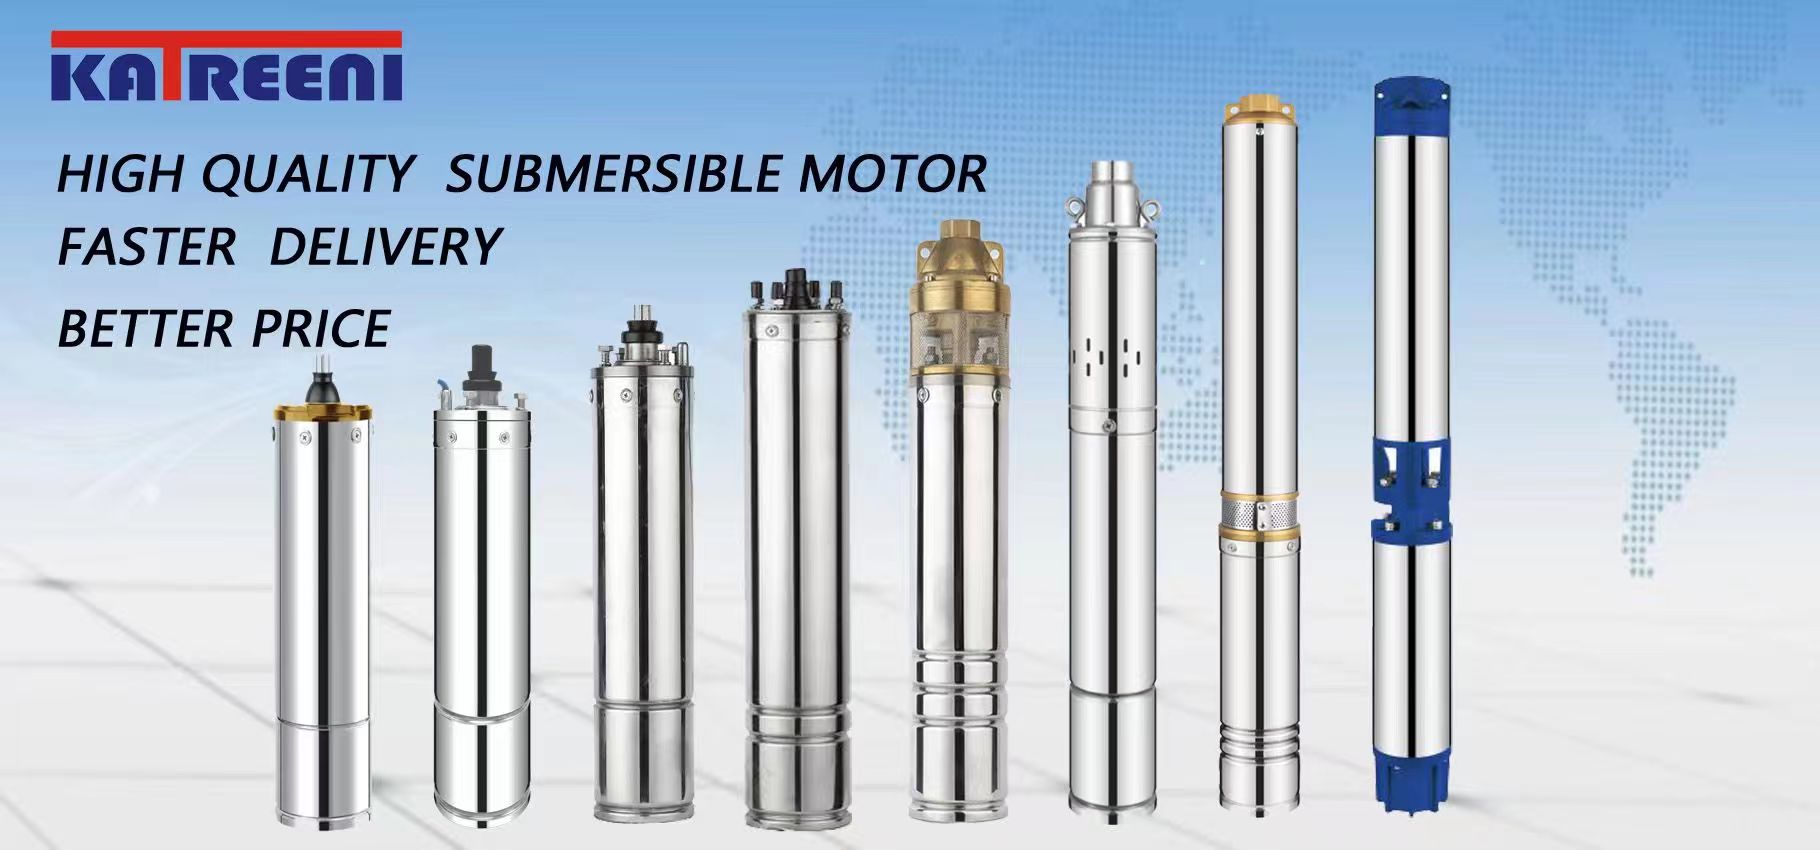 How Long Can A Submersible Pump Last?